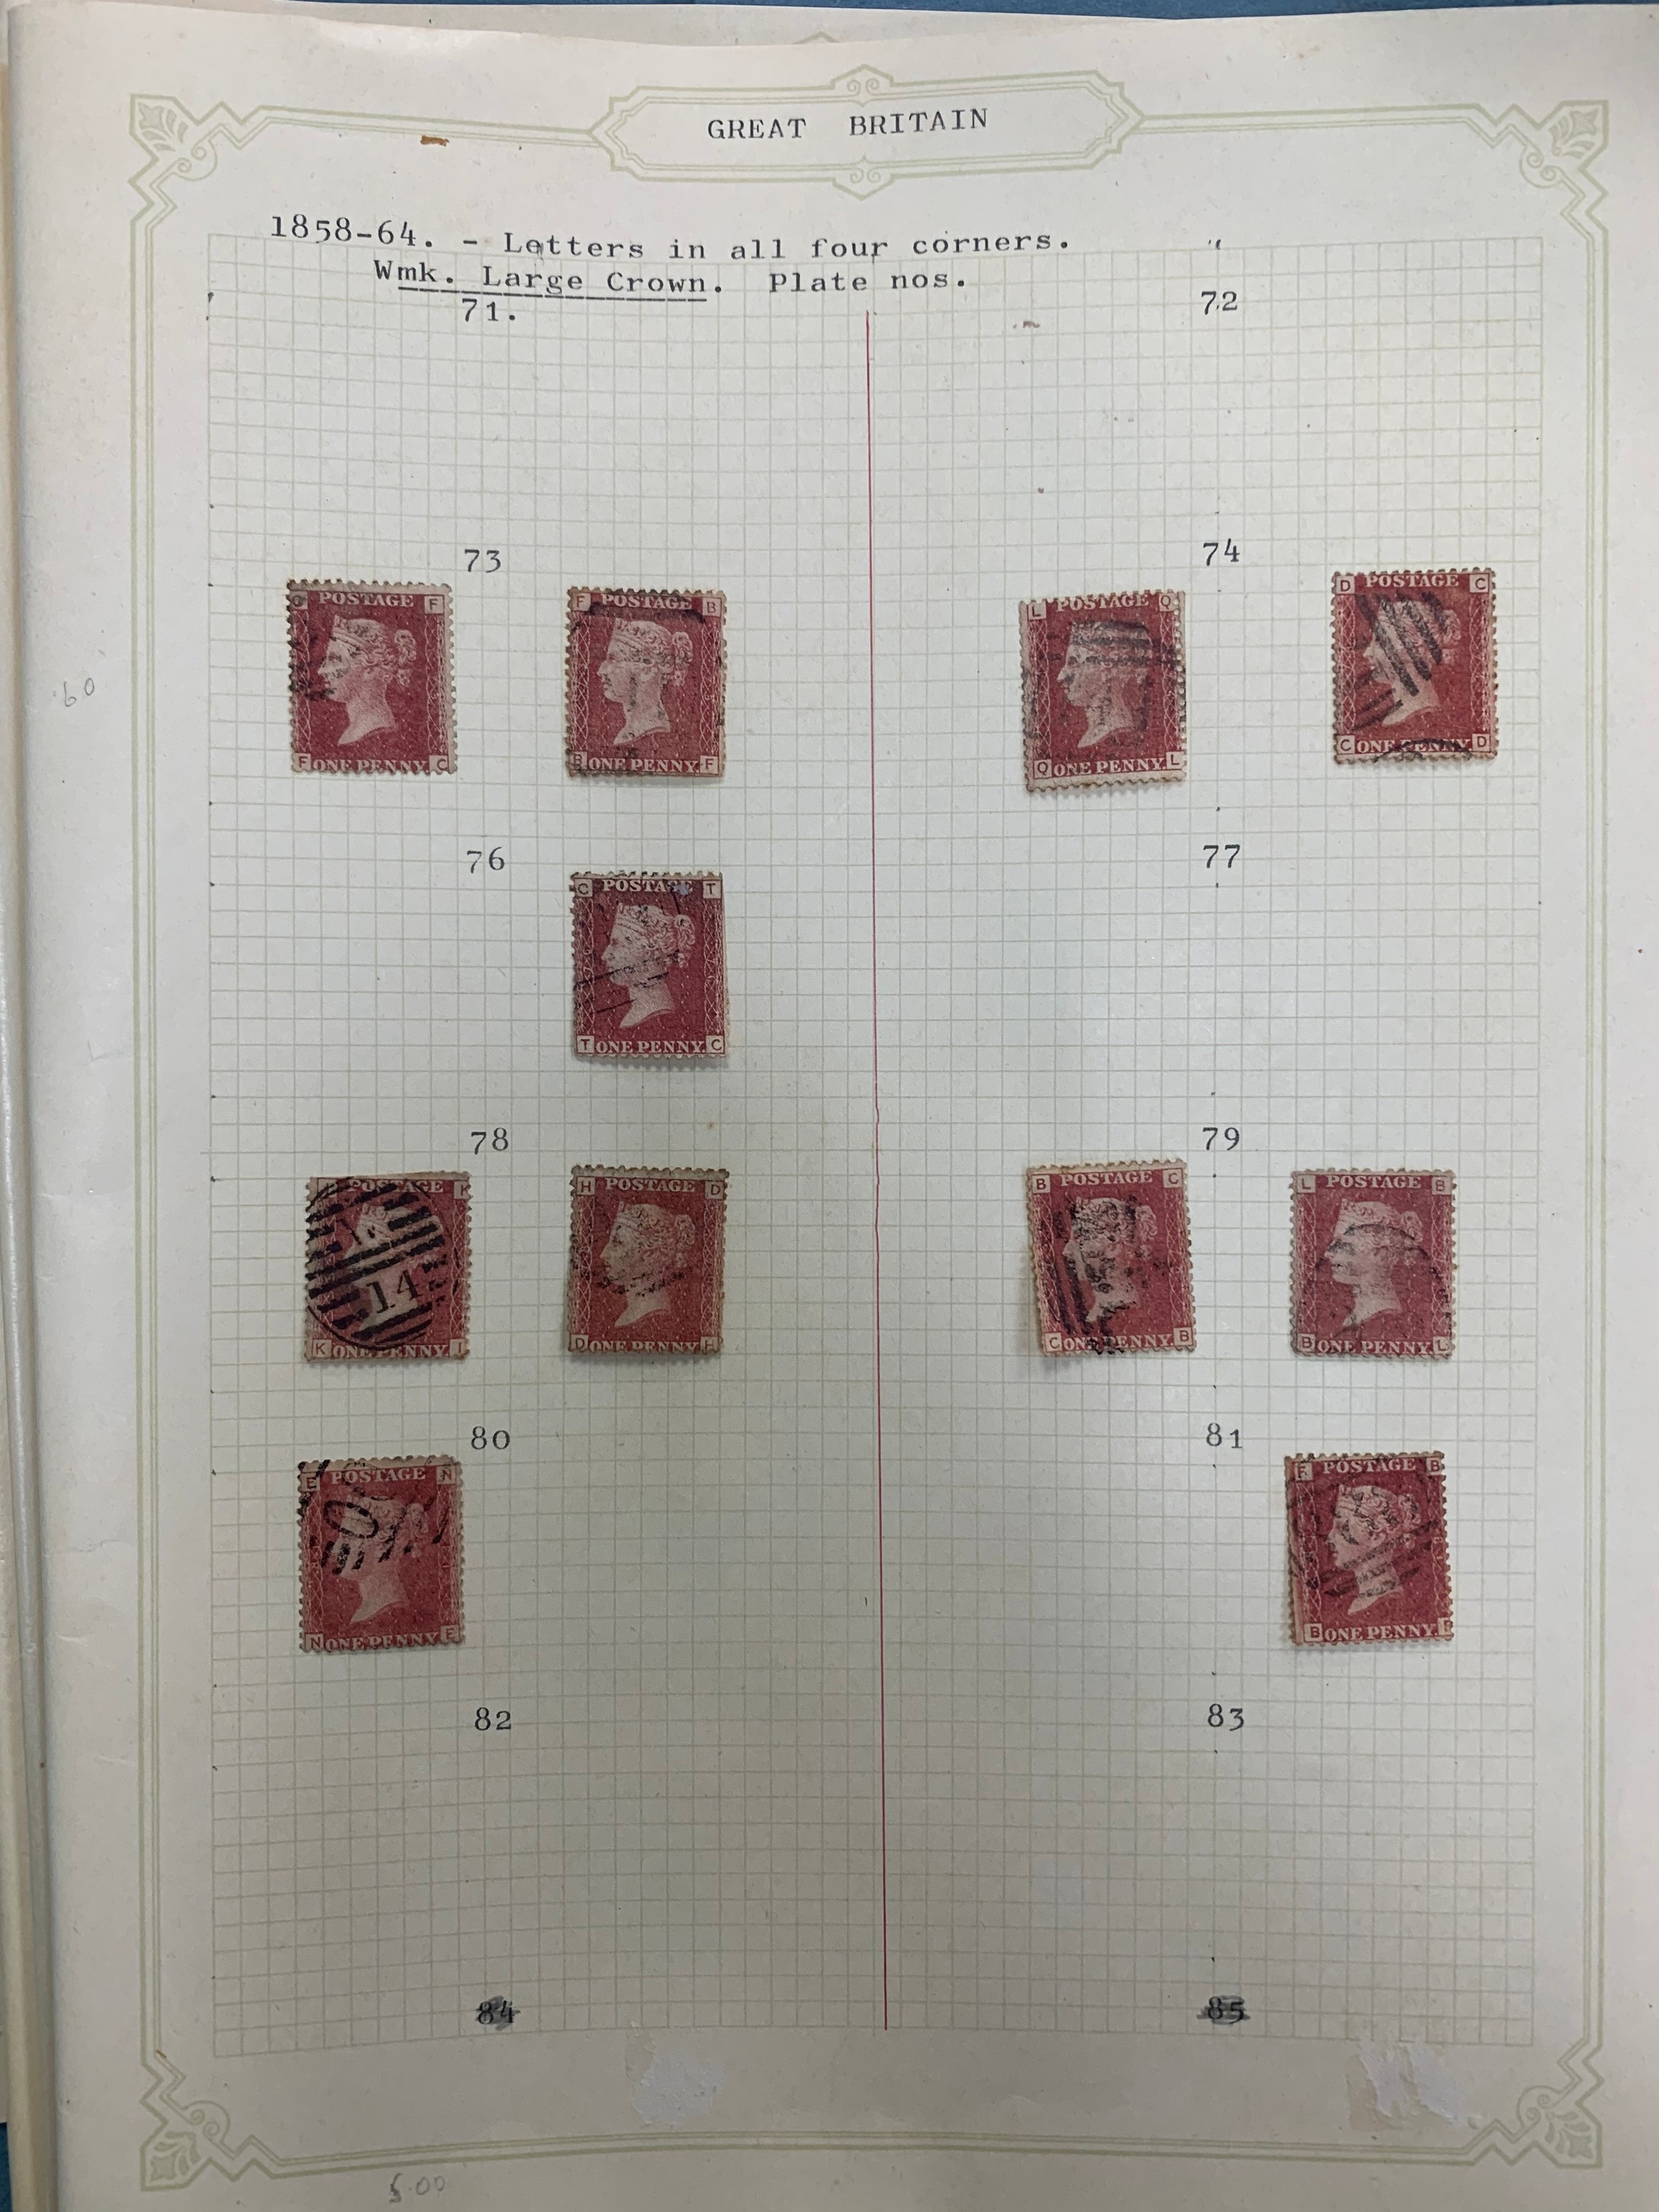 Great Britain, 1858-64 annotated and well-laid out collection of 1d Penny Reds FU from plate 73 to